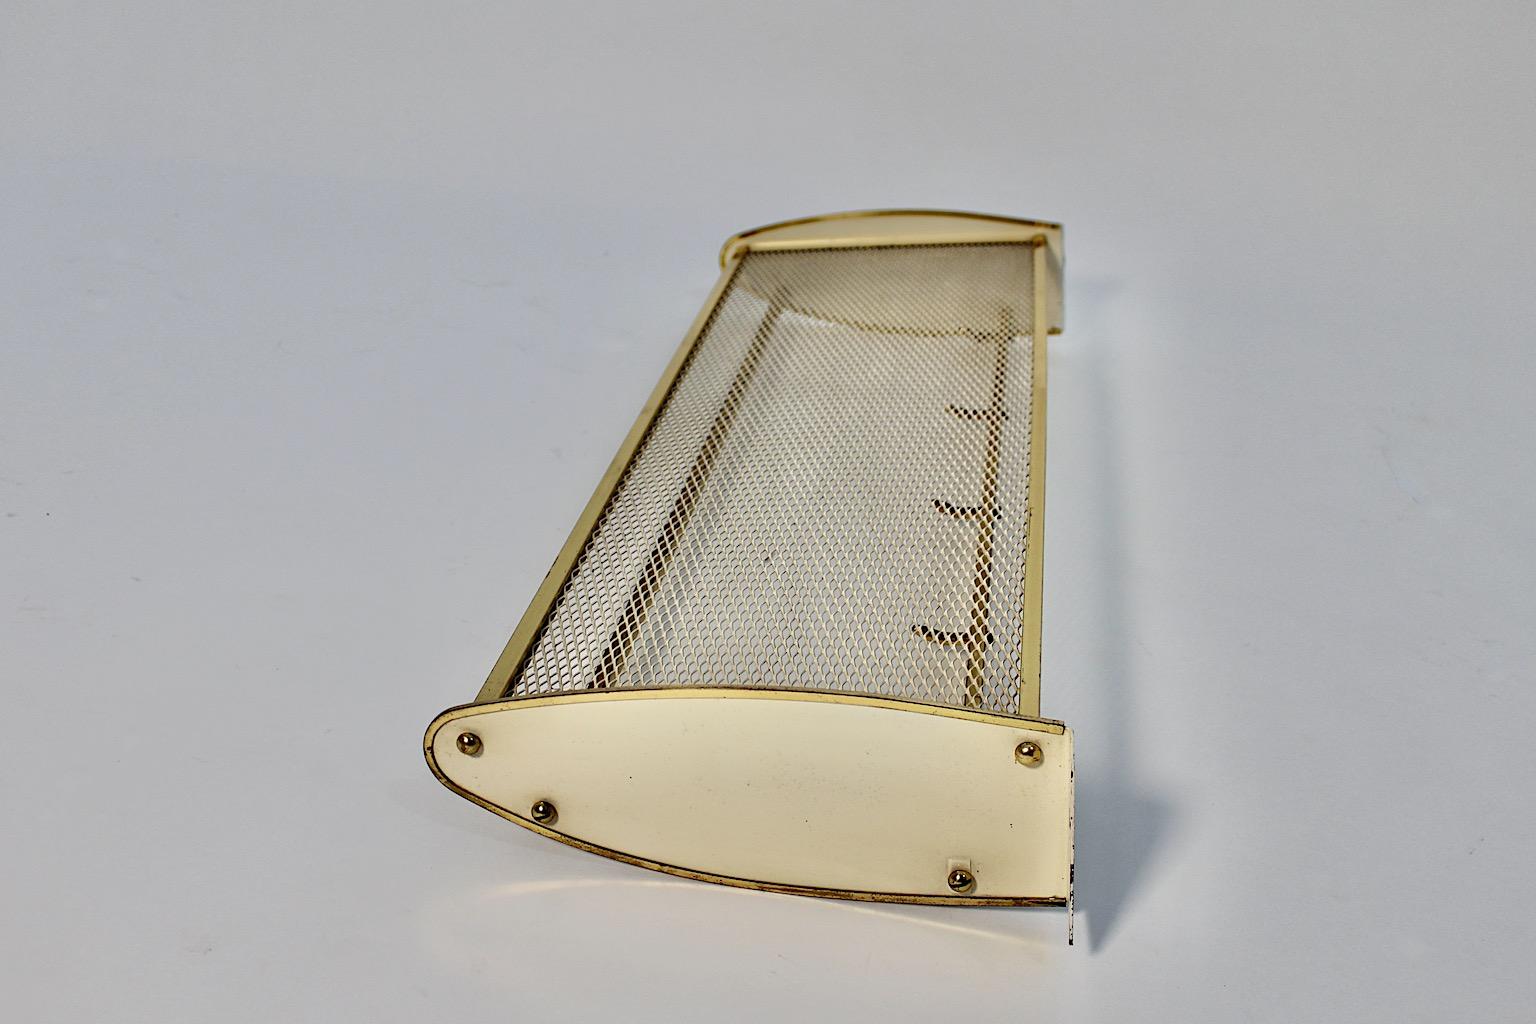 Mid Century Modern vintage coat rack or hat rack from brass and white metal 1950s Italy.
A wonderful and elegant wall mounted coat rack or hat rack from white lacquered perforated metal and brass details Italy, 1950s.
This stunning wall mounted coat